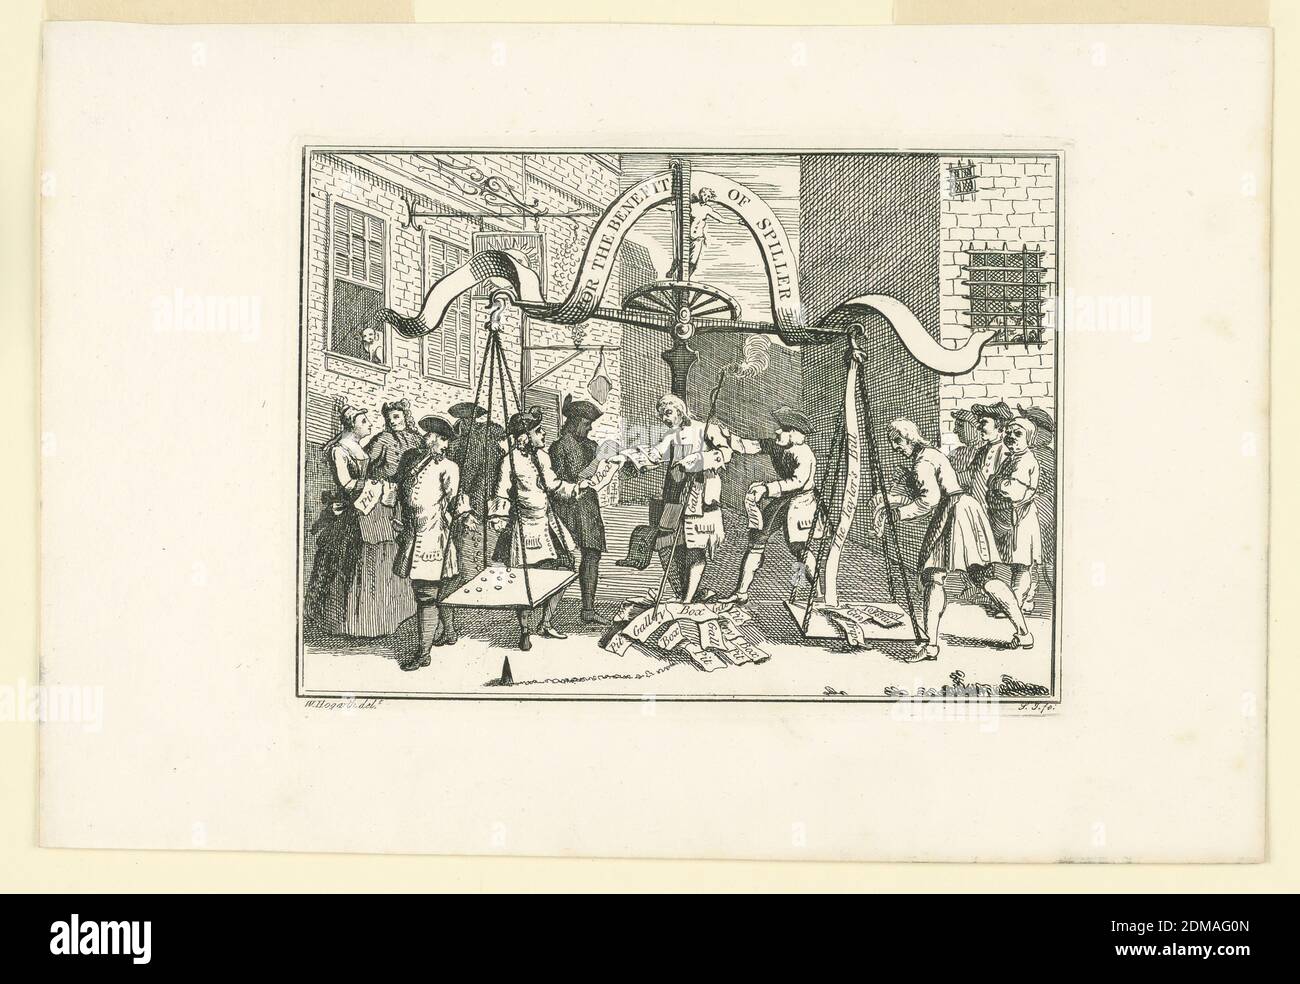 Ticket for the Benefit of Spiller, the Player, Samuel Ireland, English, ca. 1744–1800, William Hogarth, English, 1697 - 1764, Etching on paper, A street scene most likely from a play. In immediate foreground many figures. In the middle a man with immense scales behind him. He is weighing cards with names of politicians., England, 1794, Print Stock Photo